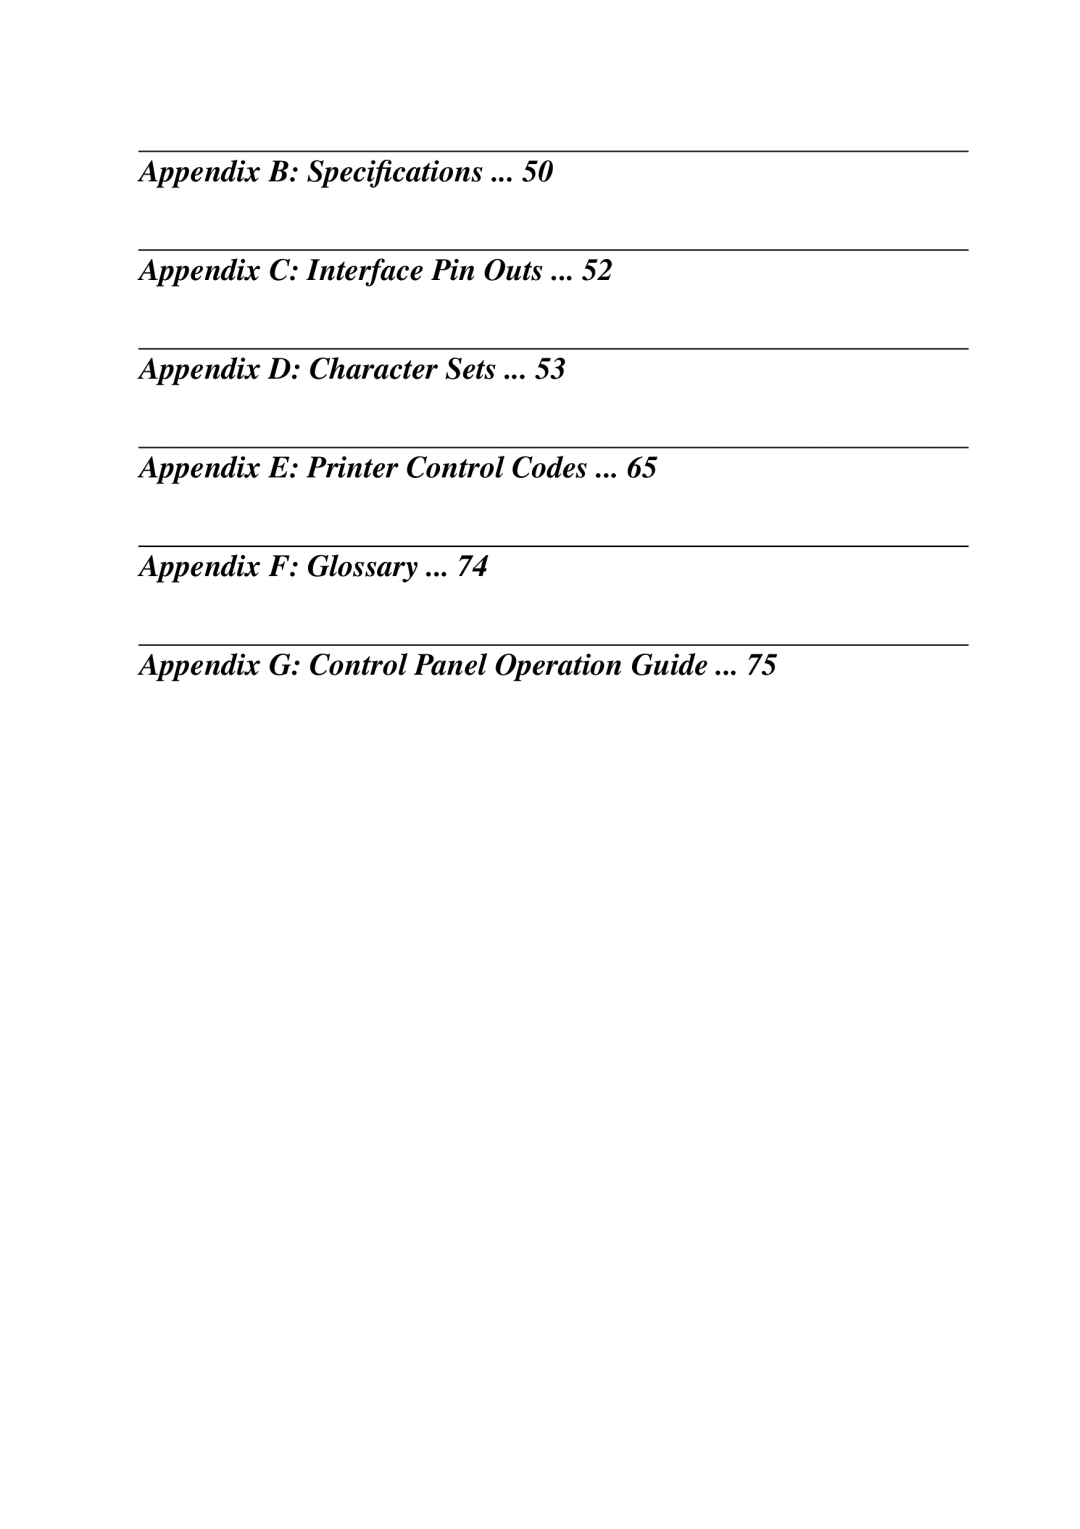 Star Micronics LC-8021 manual Appendix B Speciﬁcations Appendix C Interface Pin Outs 